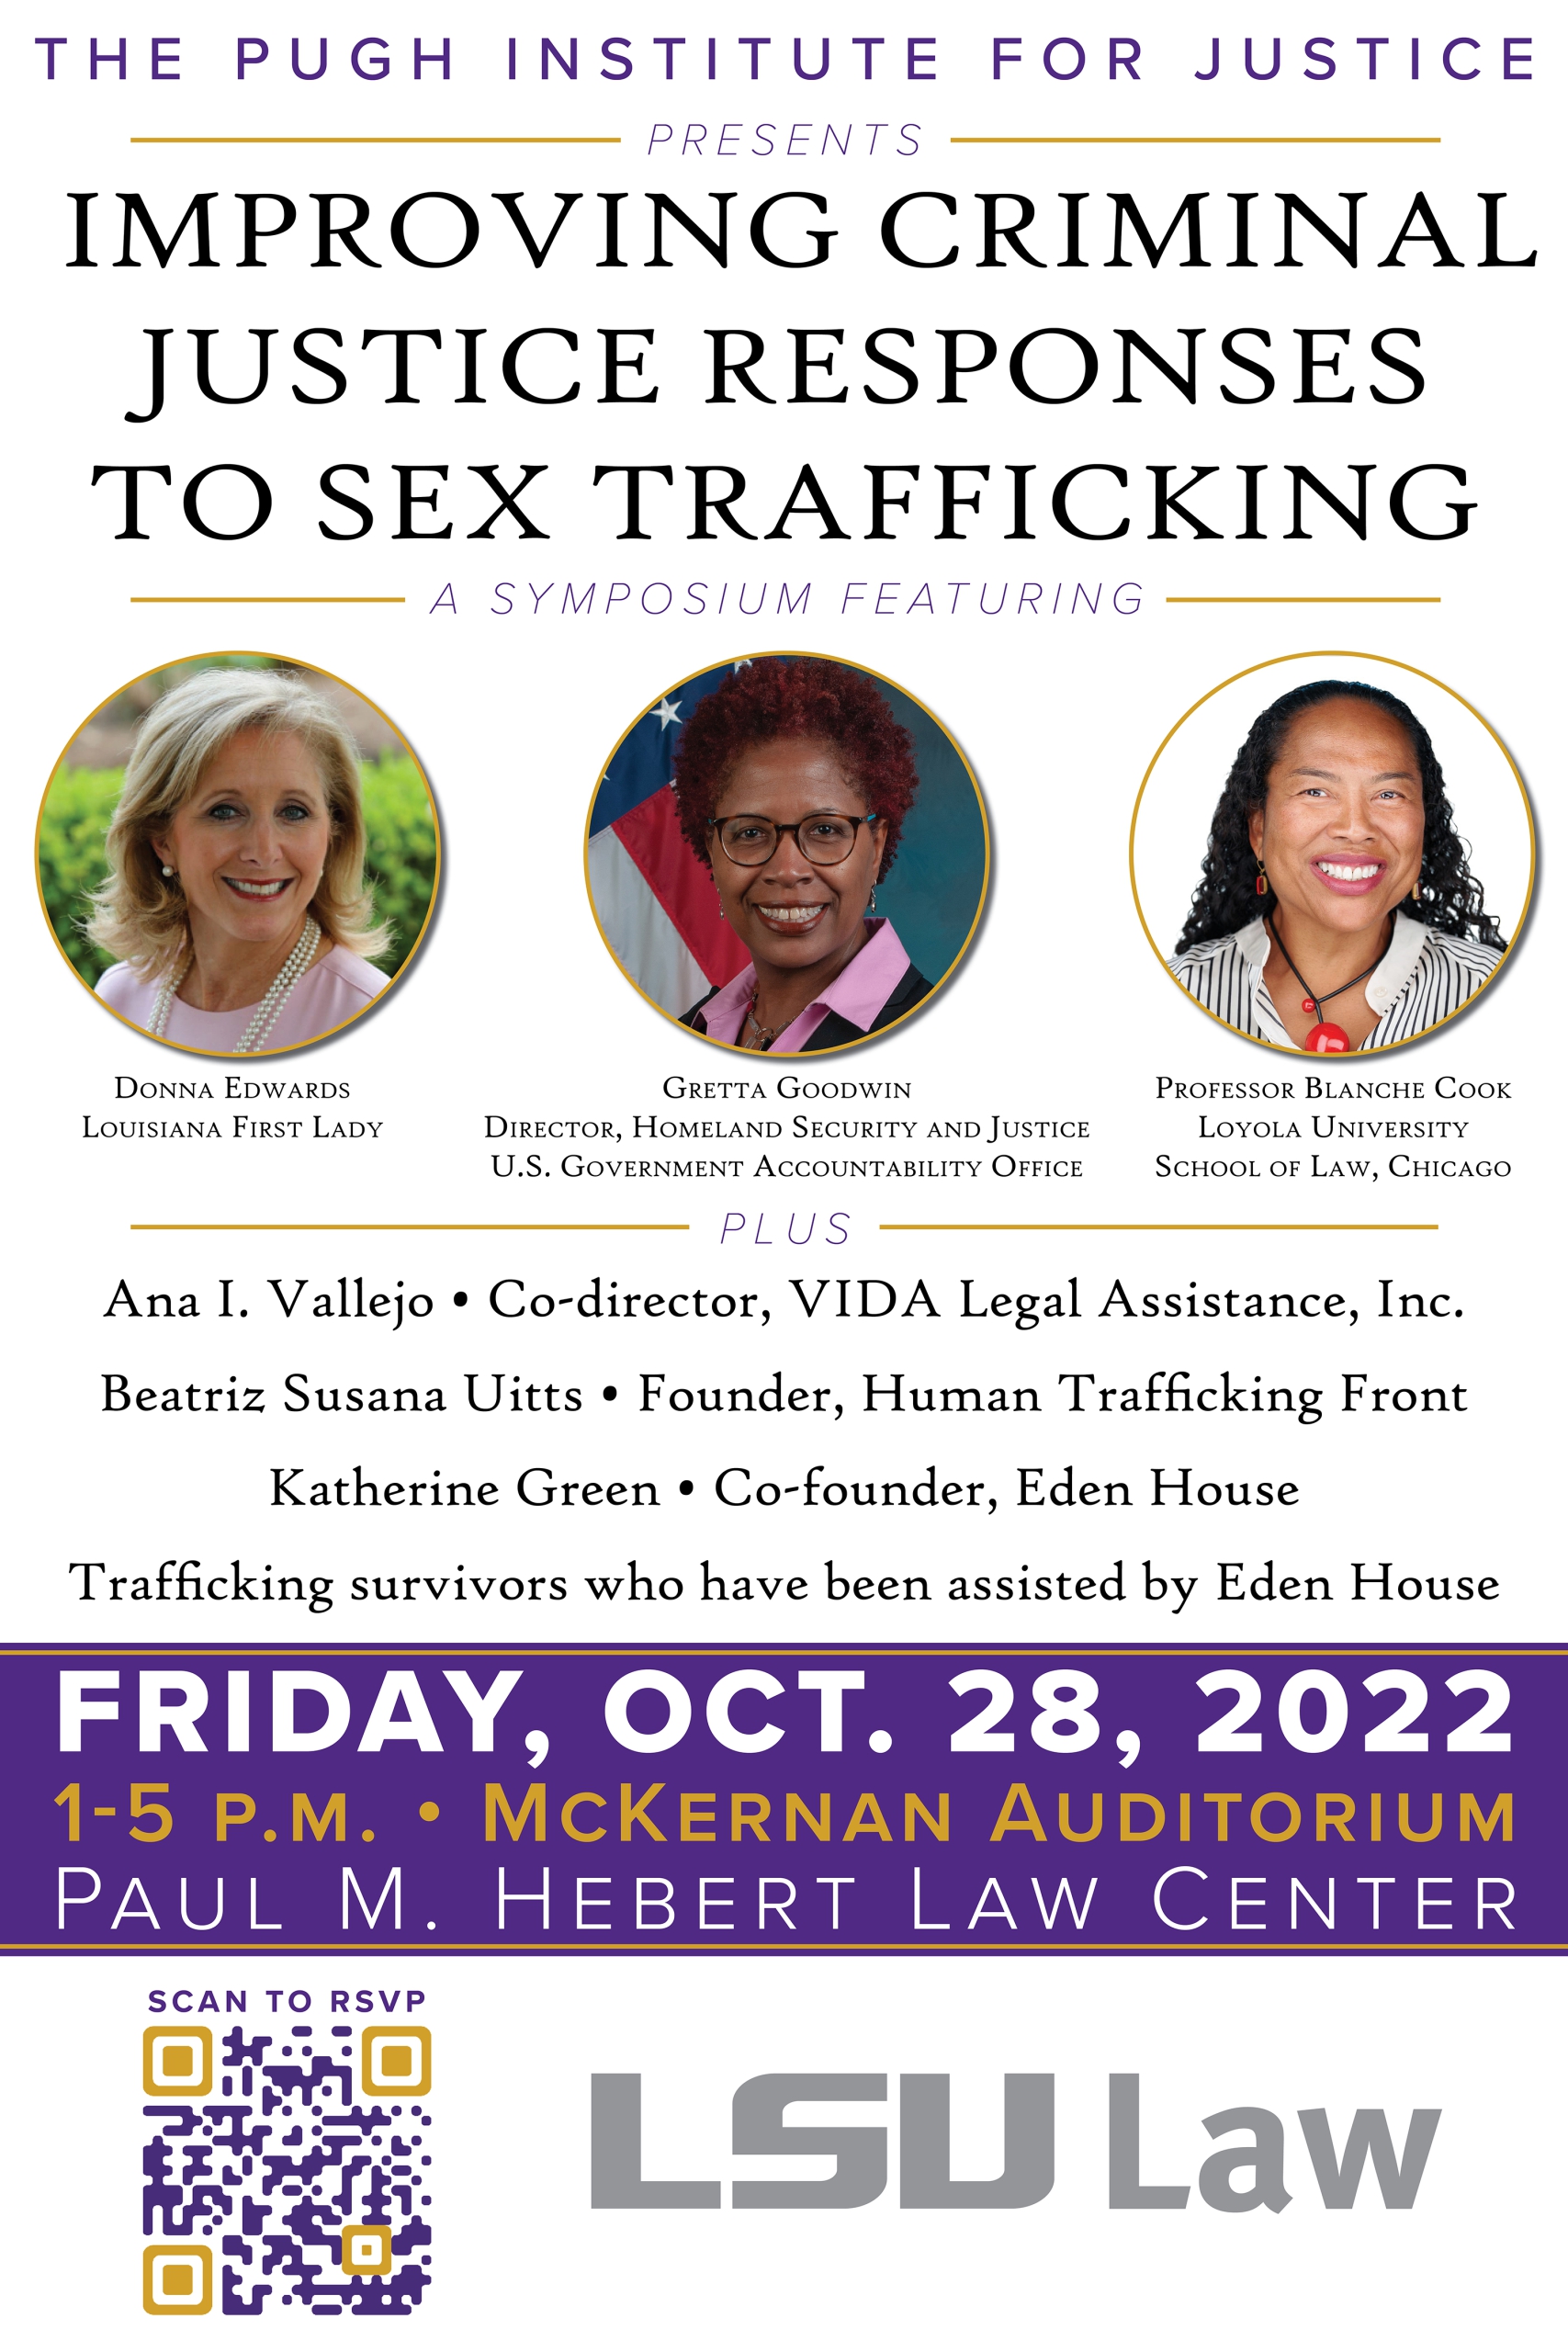 Louisiana First Lady Donna Edwards to join legal scholars, trafficking survivors, and service providers at “Improving Criminal Justice Responses to Sex Trafficking” symposium at LSU Law on Friday, picture